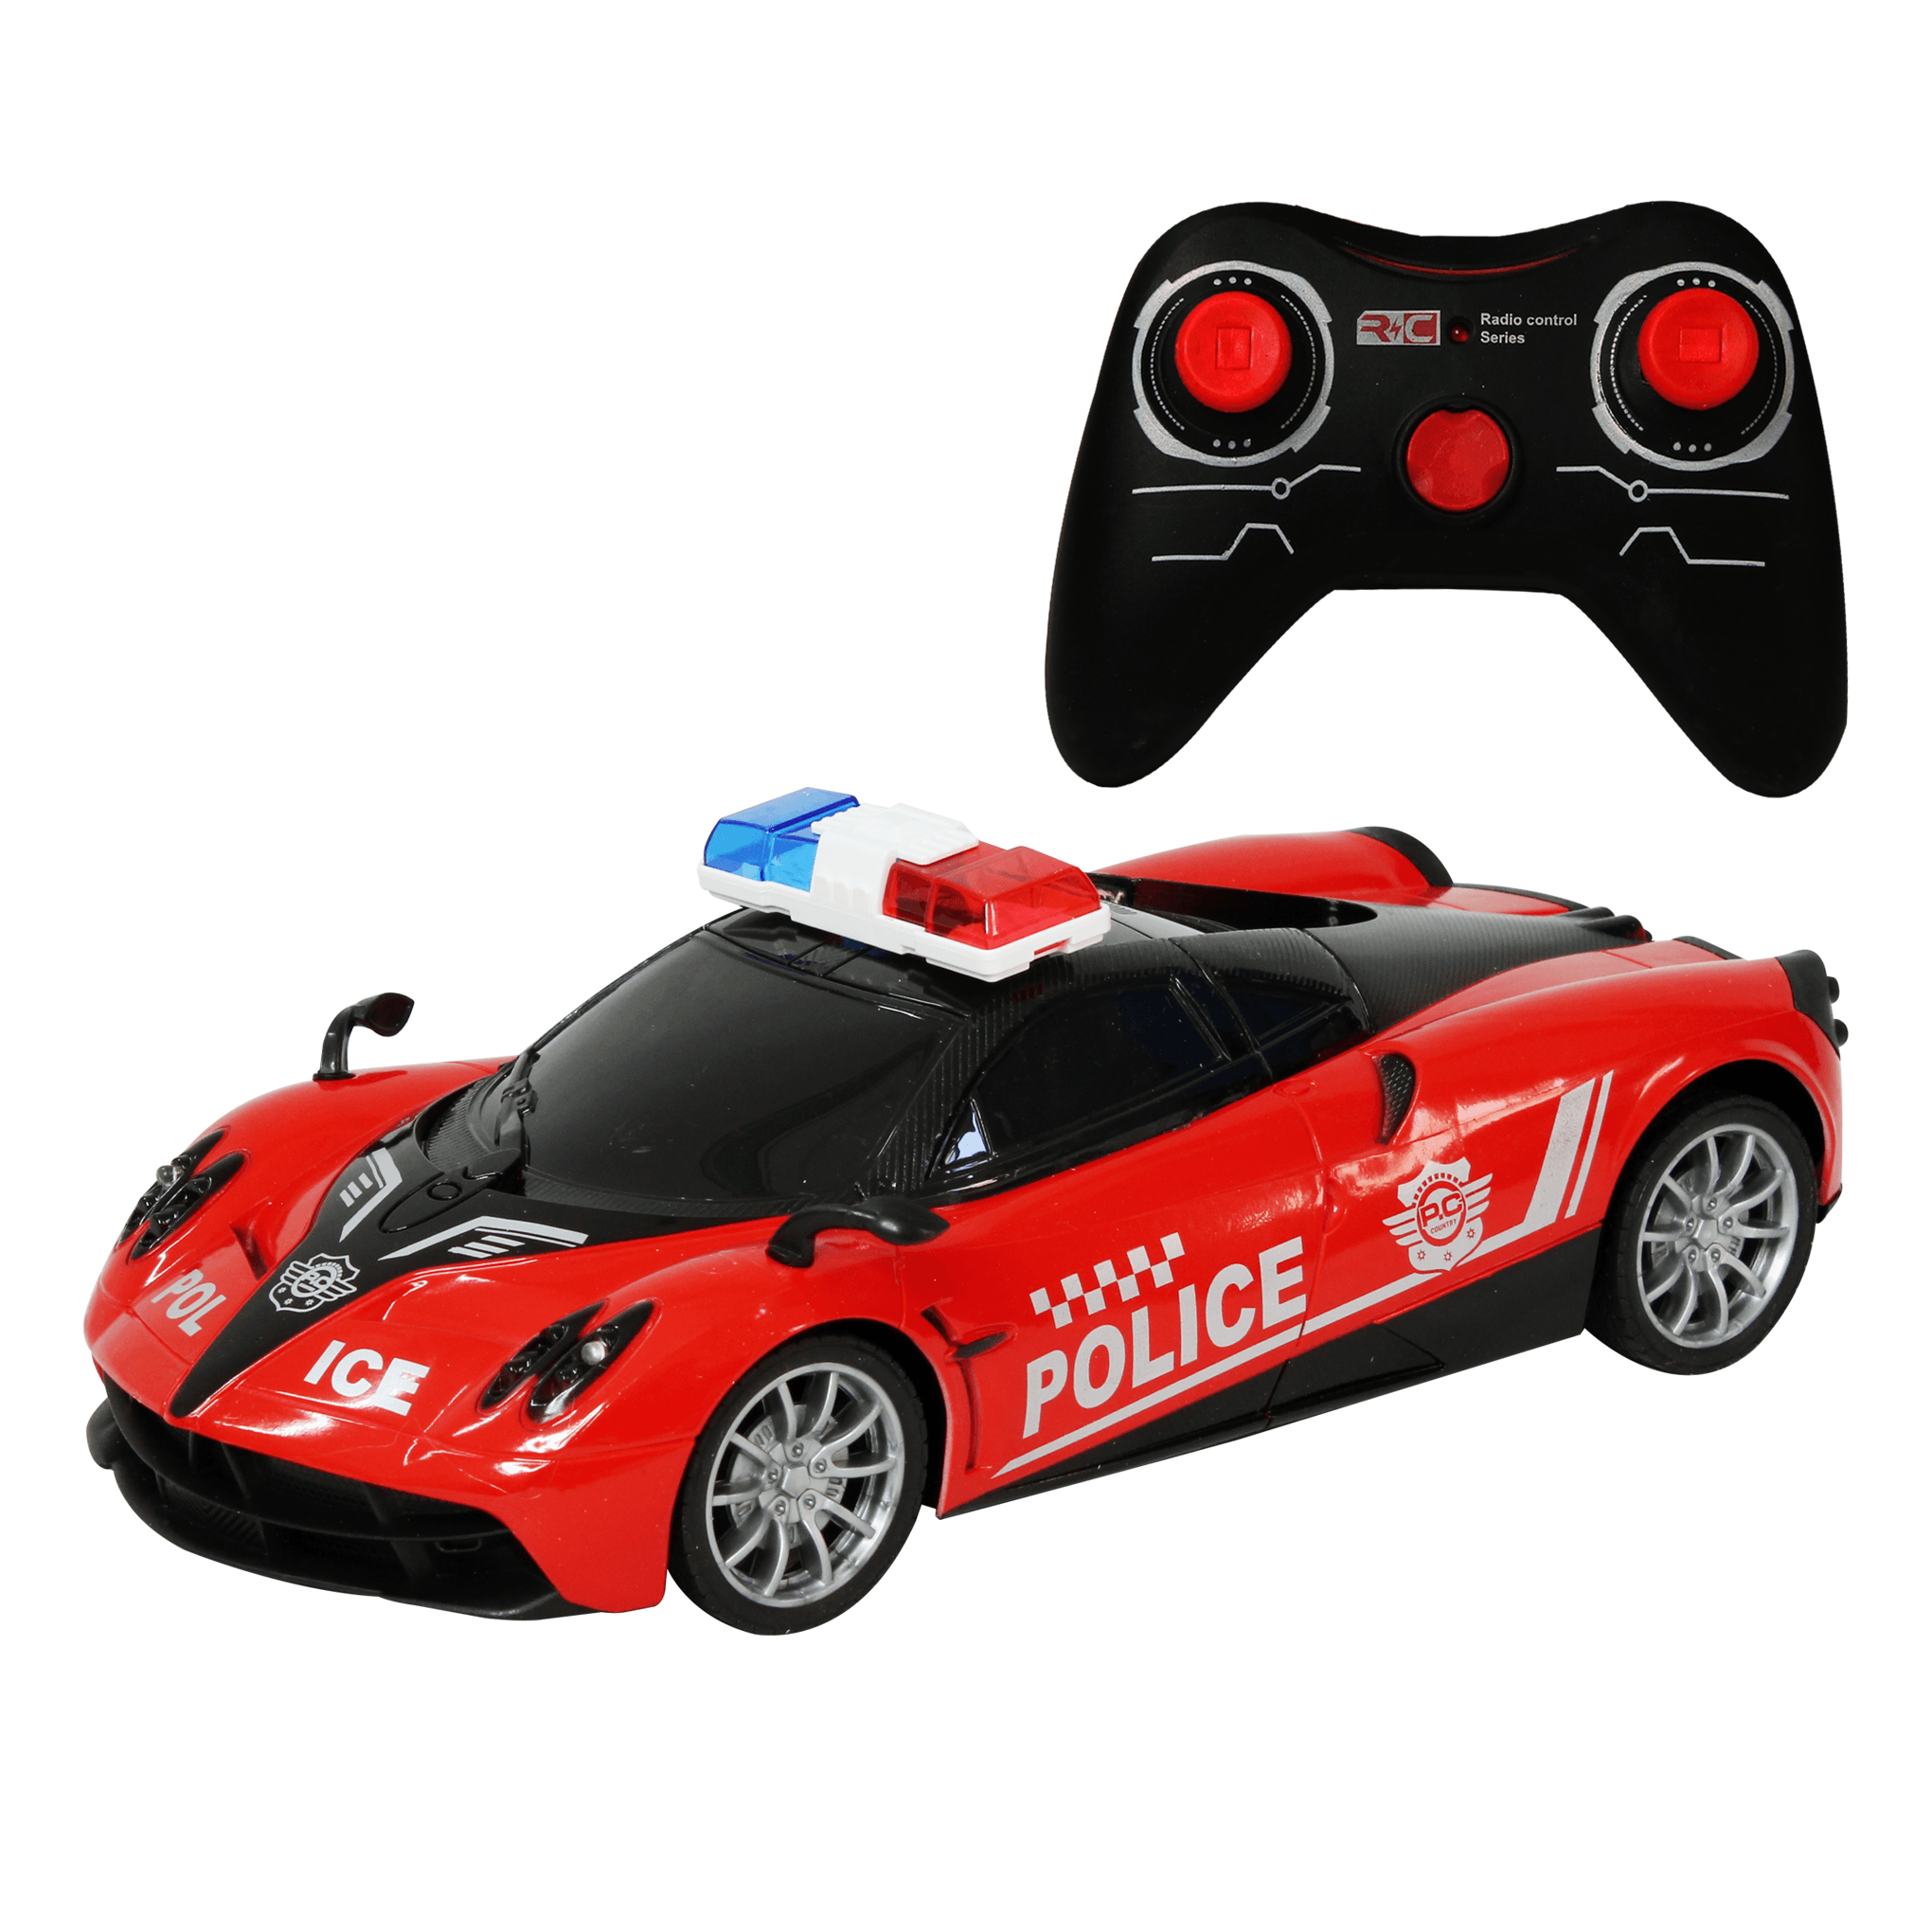 Police sports car toy with radio control and lights